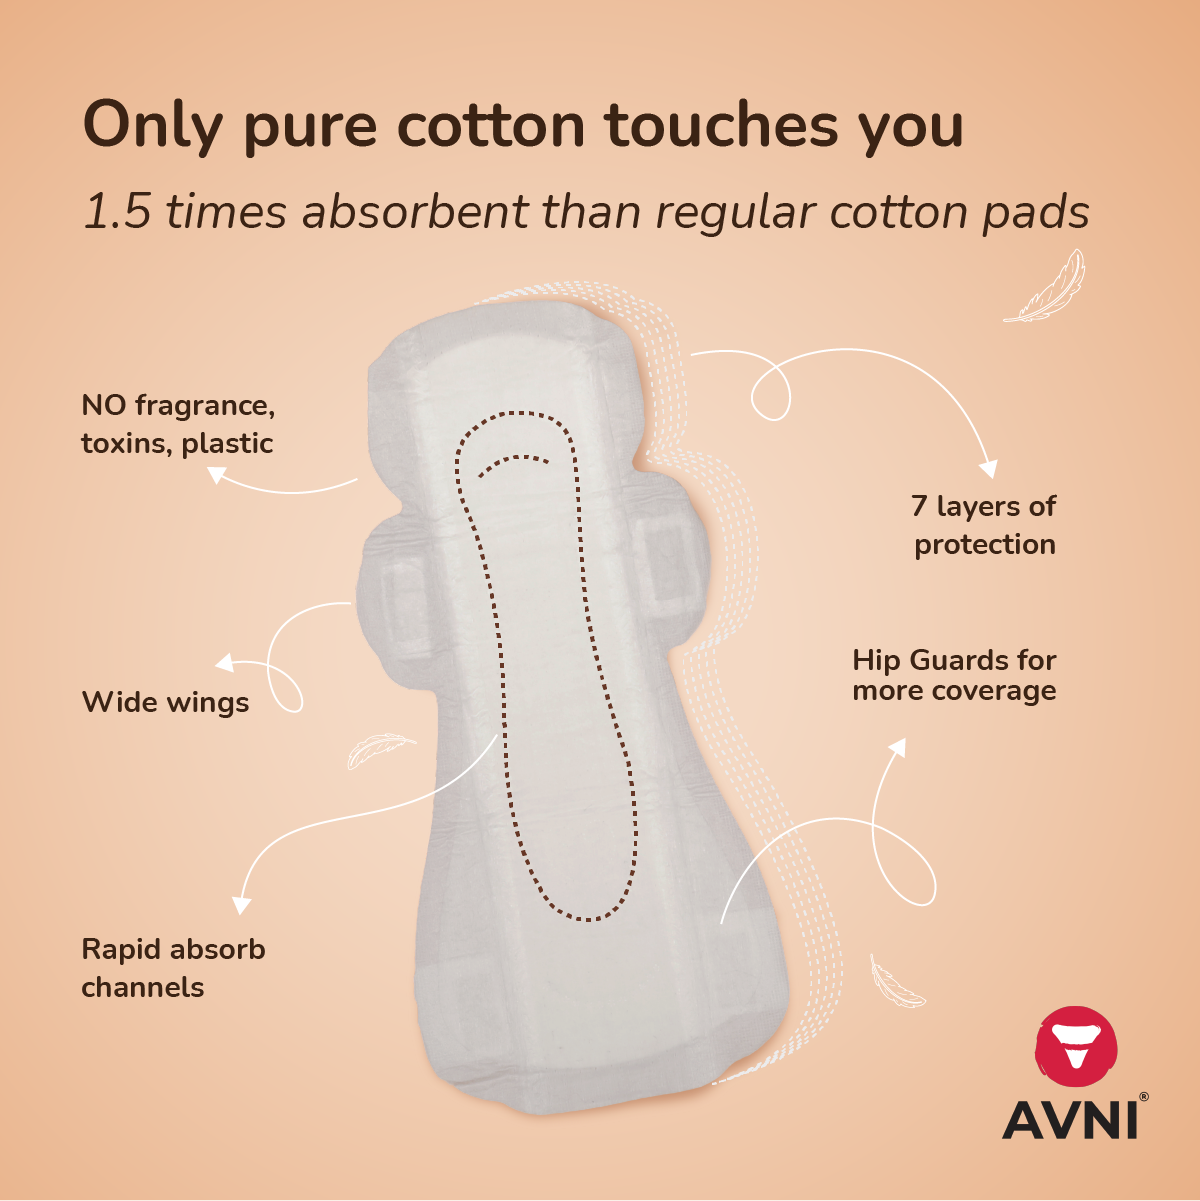 Avni Fluff Trial pack of 1 pad - Antimicrobial, Dry Feel Reusable